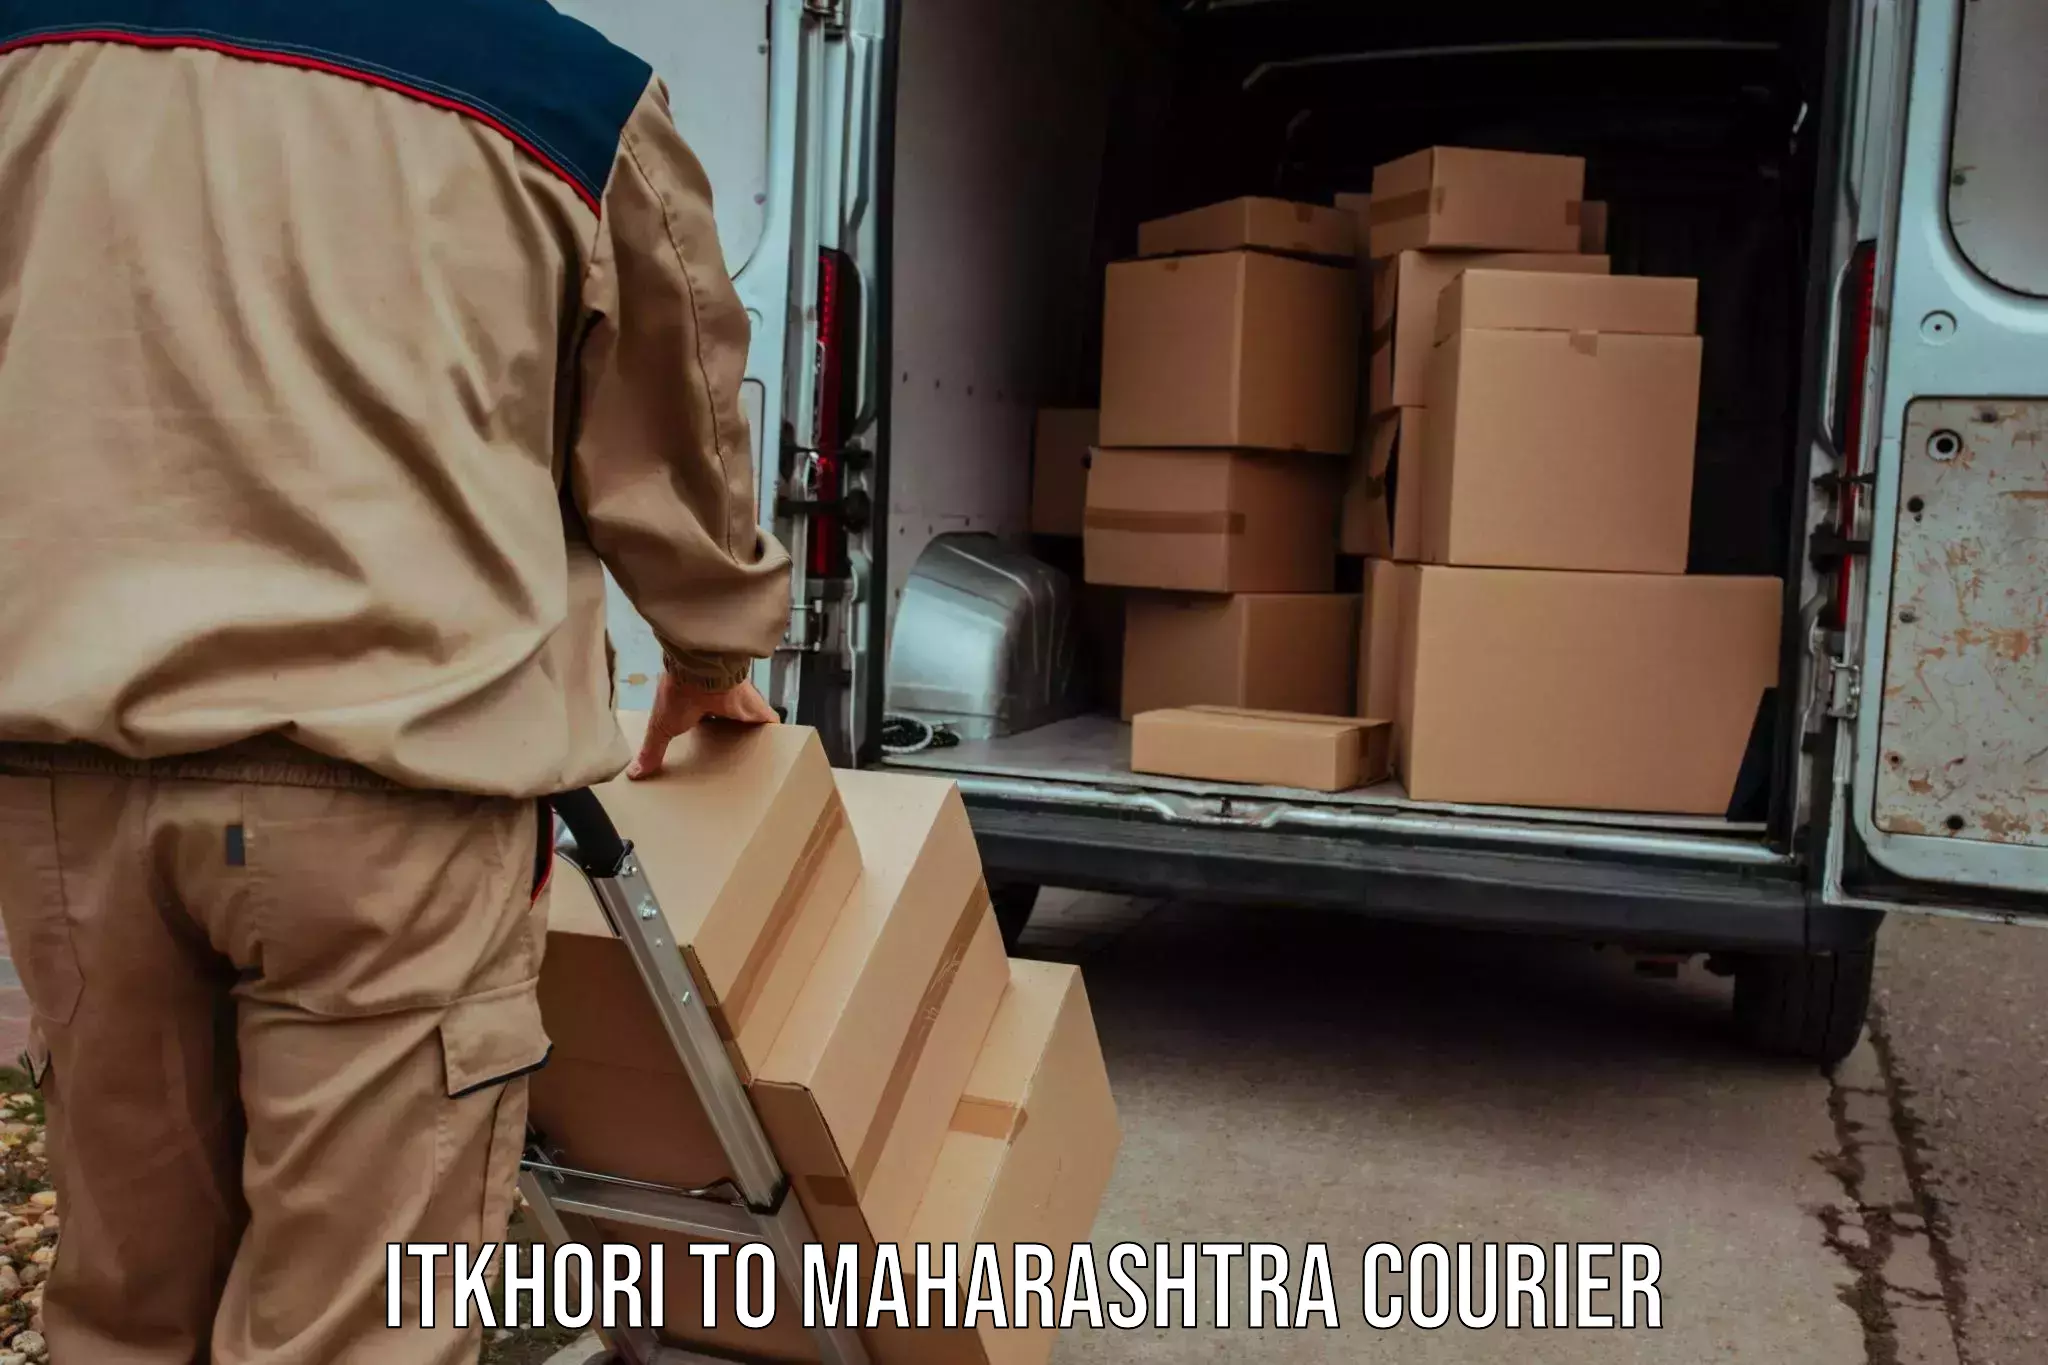 Next-day delivery options Itkhori to Sangameshwar